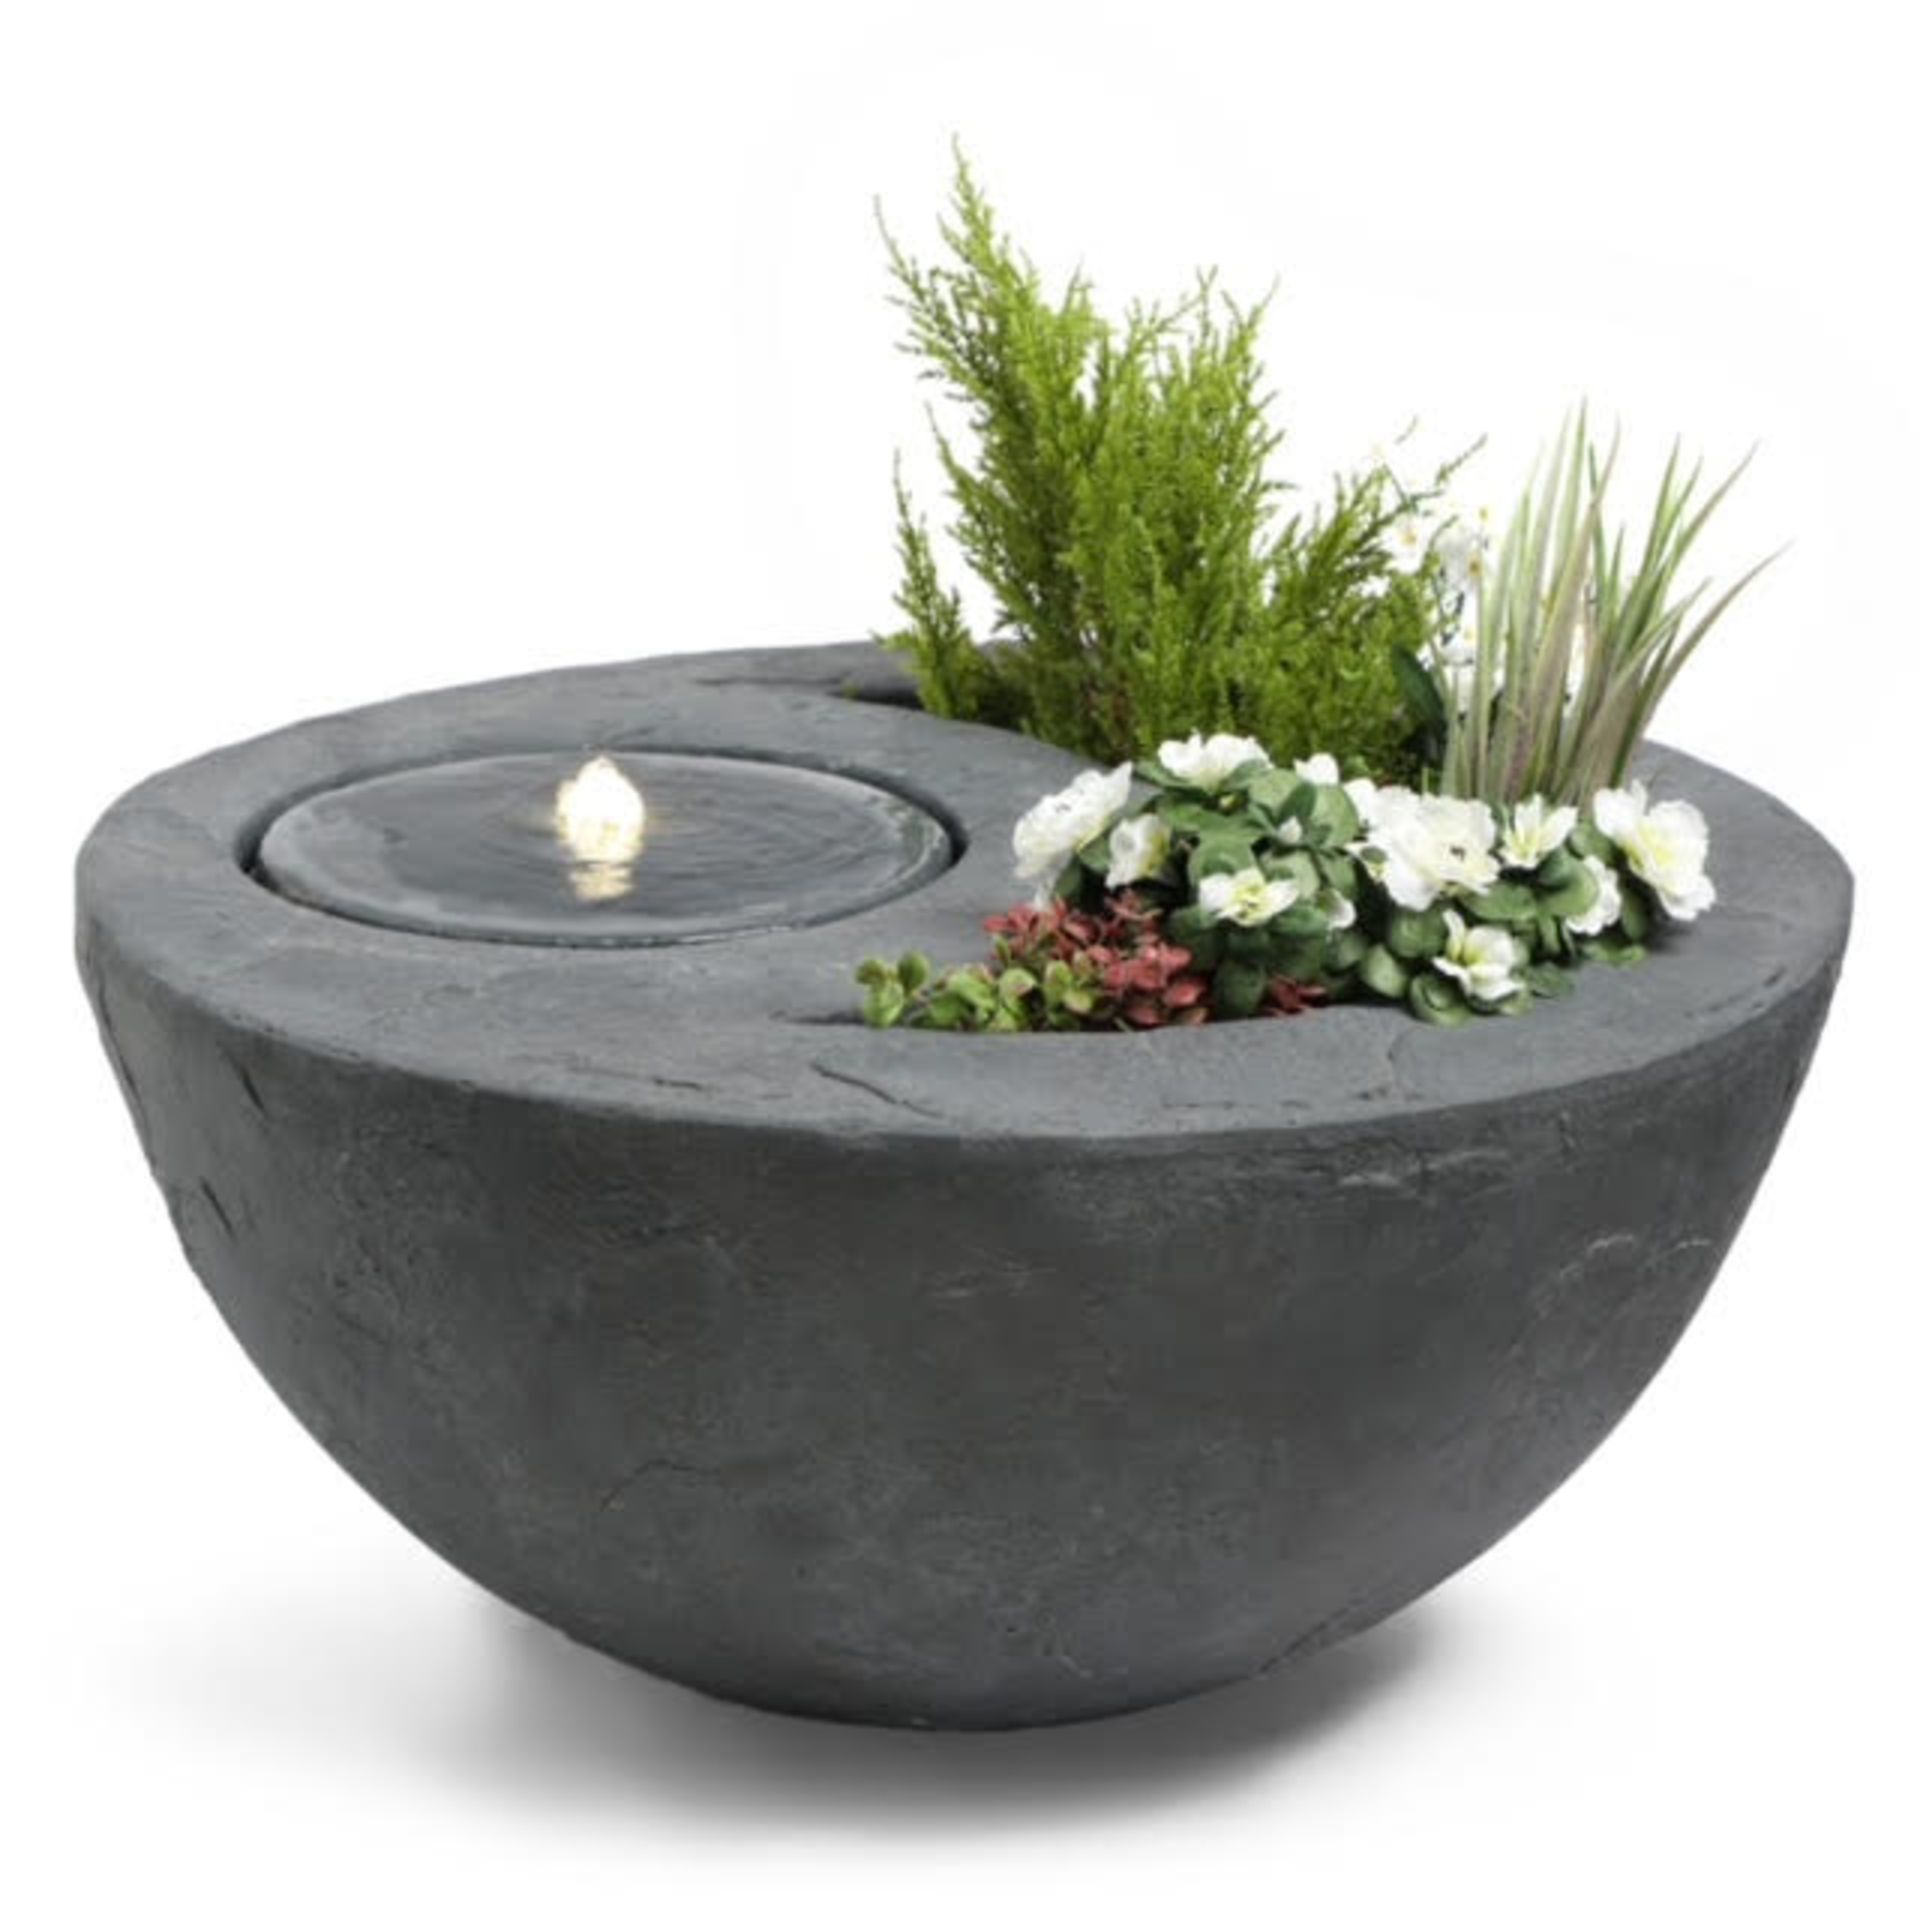 Trade Lot 5 x New & Boxed Dual Water Feature and Planter. RRP £299.99 (REF726) - Garden Bowl - Image 6 of 8